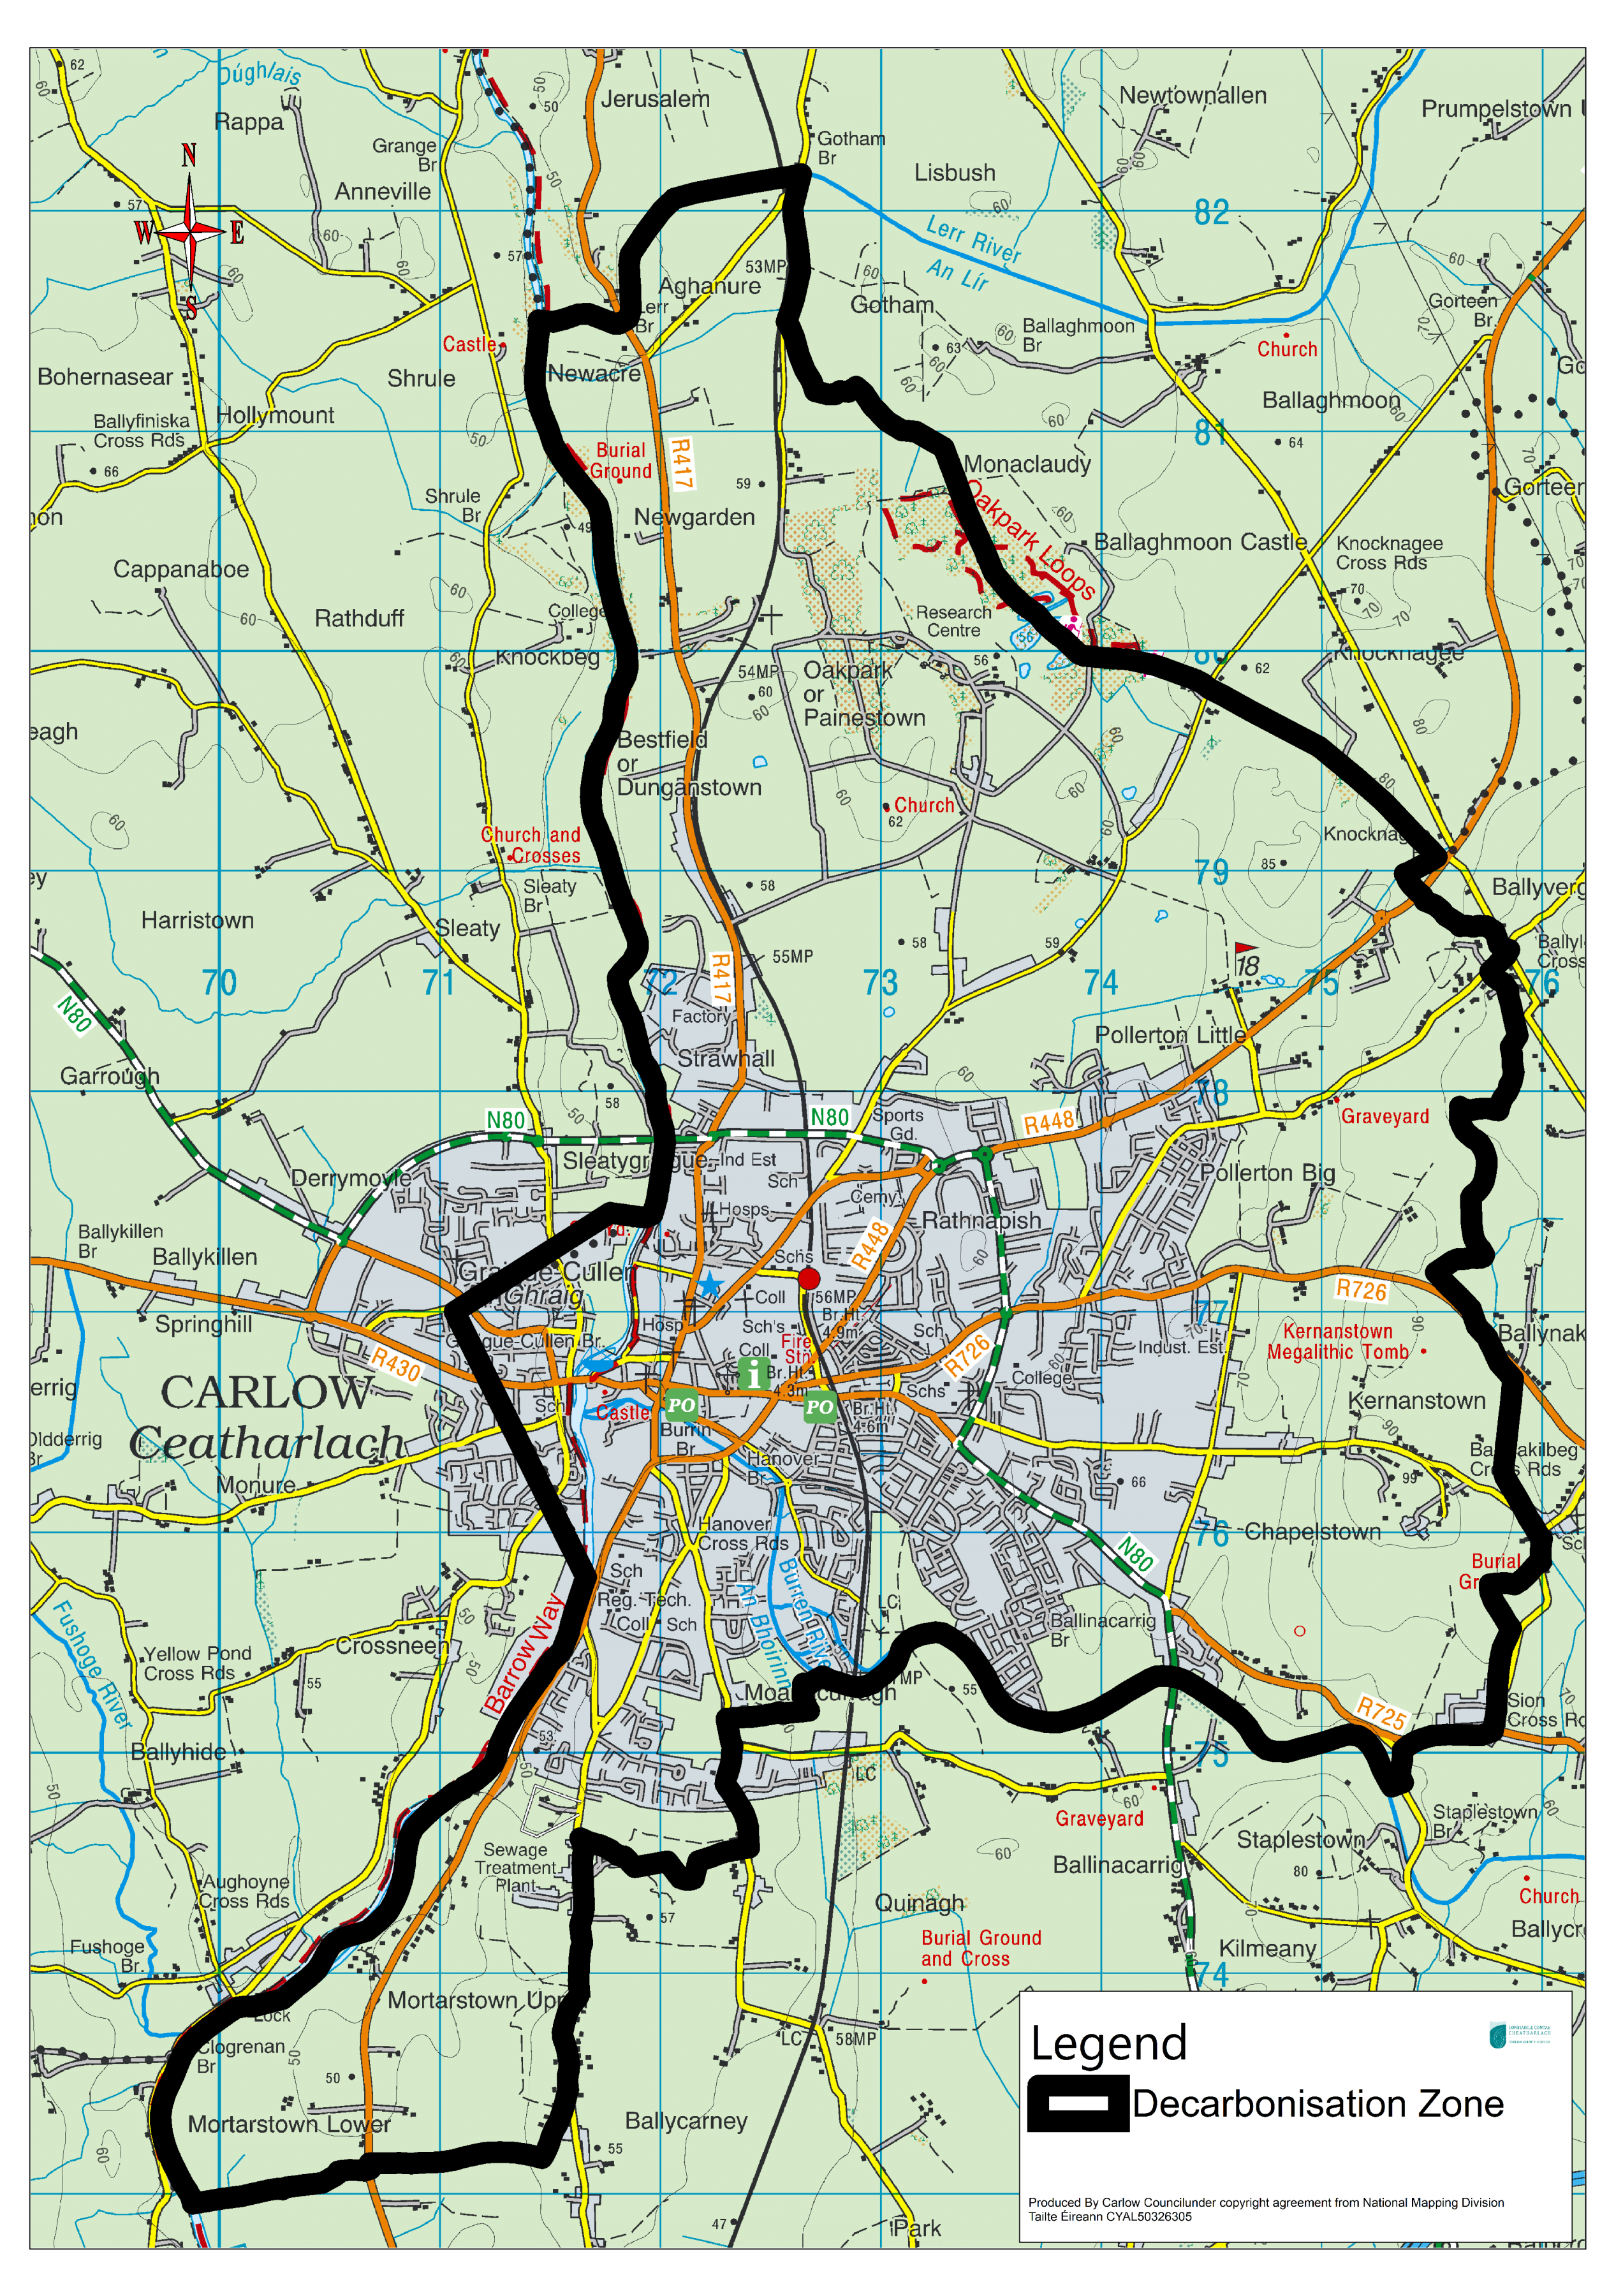 Map 11.1 Carlow Town Decarbonisation Zone